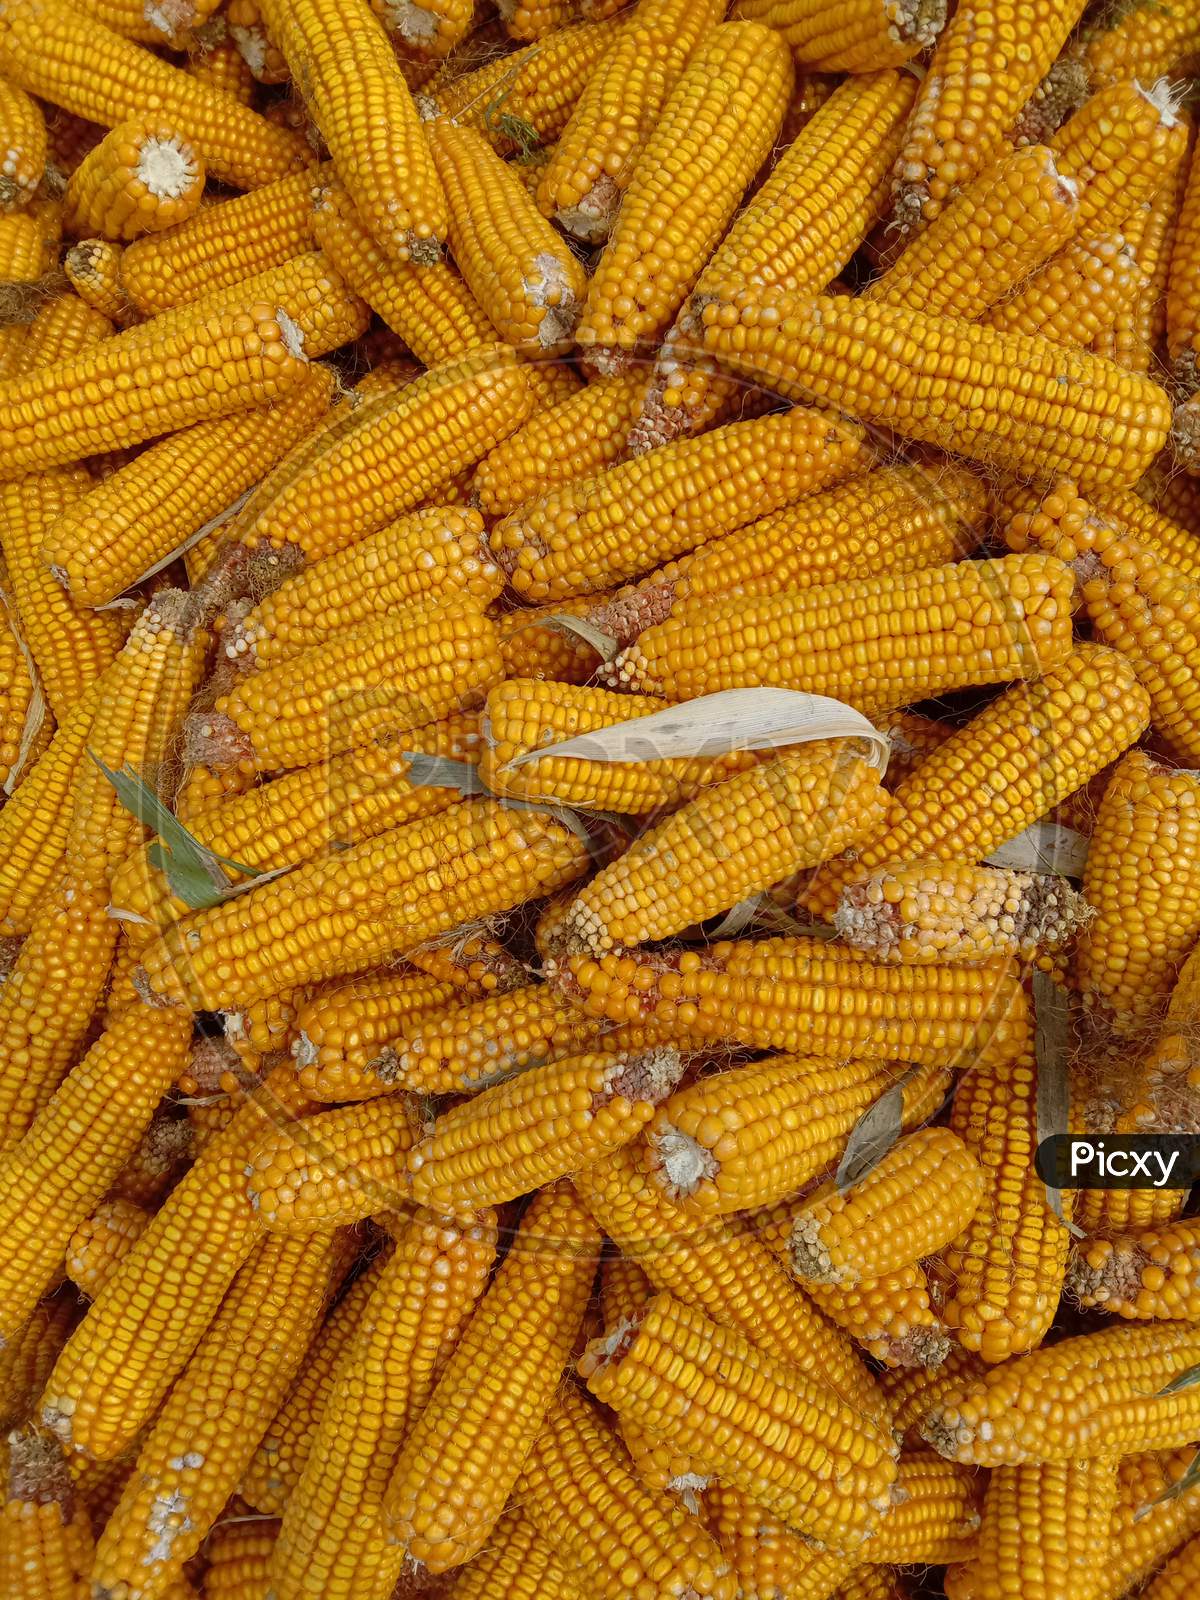 collection of corns in a village.